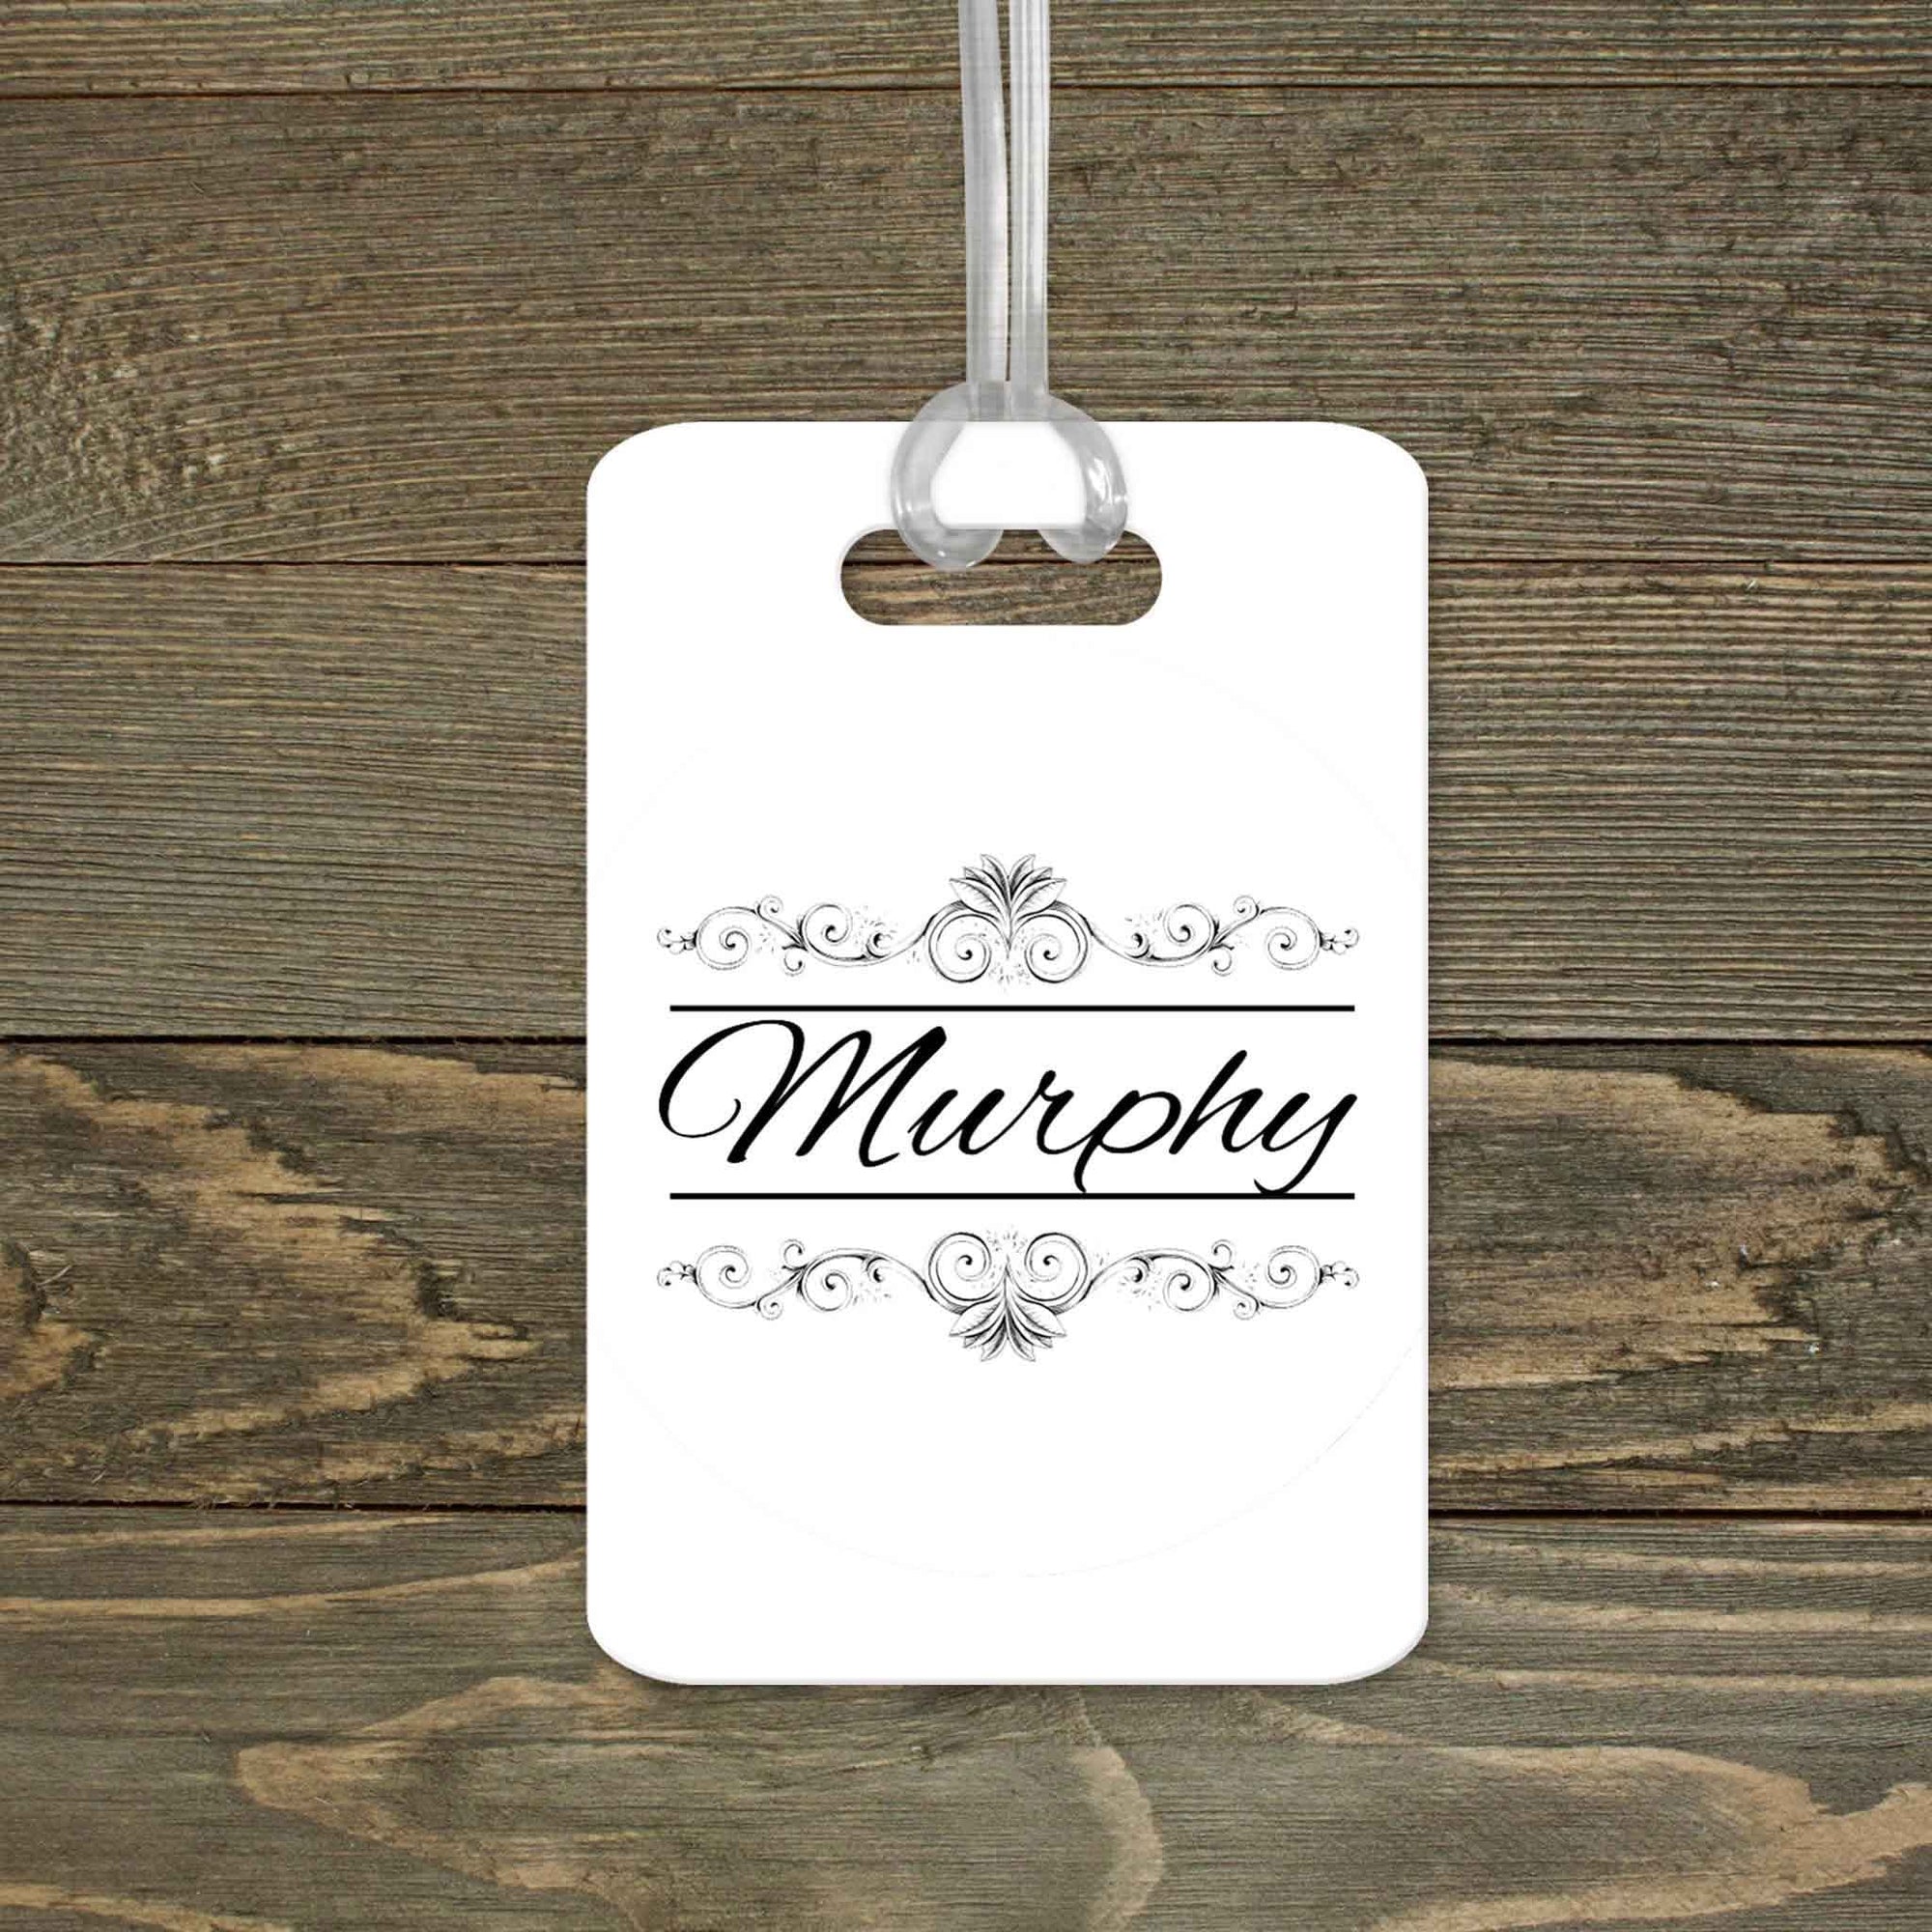 This & That Solutions - Personalized Luggage Tag | Custom Monogram Bag Tag | Decorative Vine - Personalized Gifts & Custom Home Decor